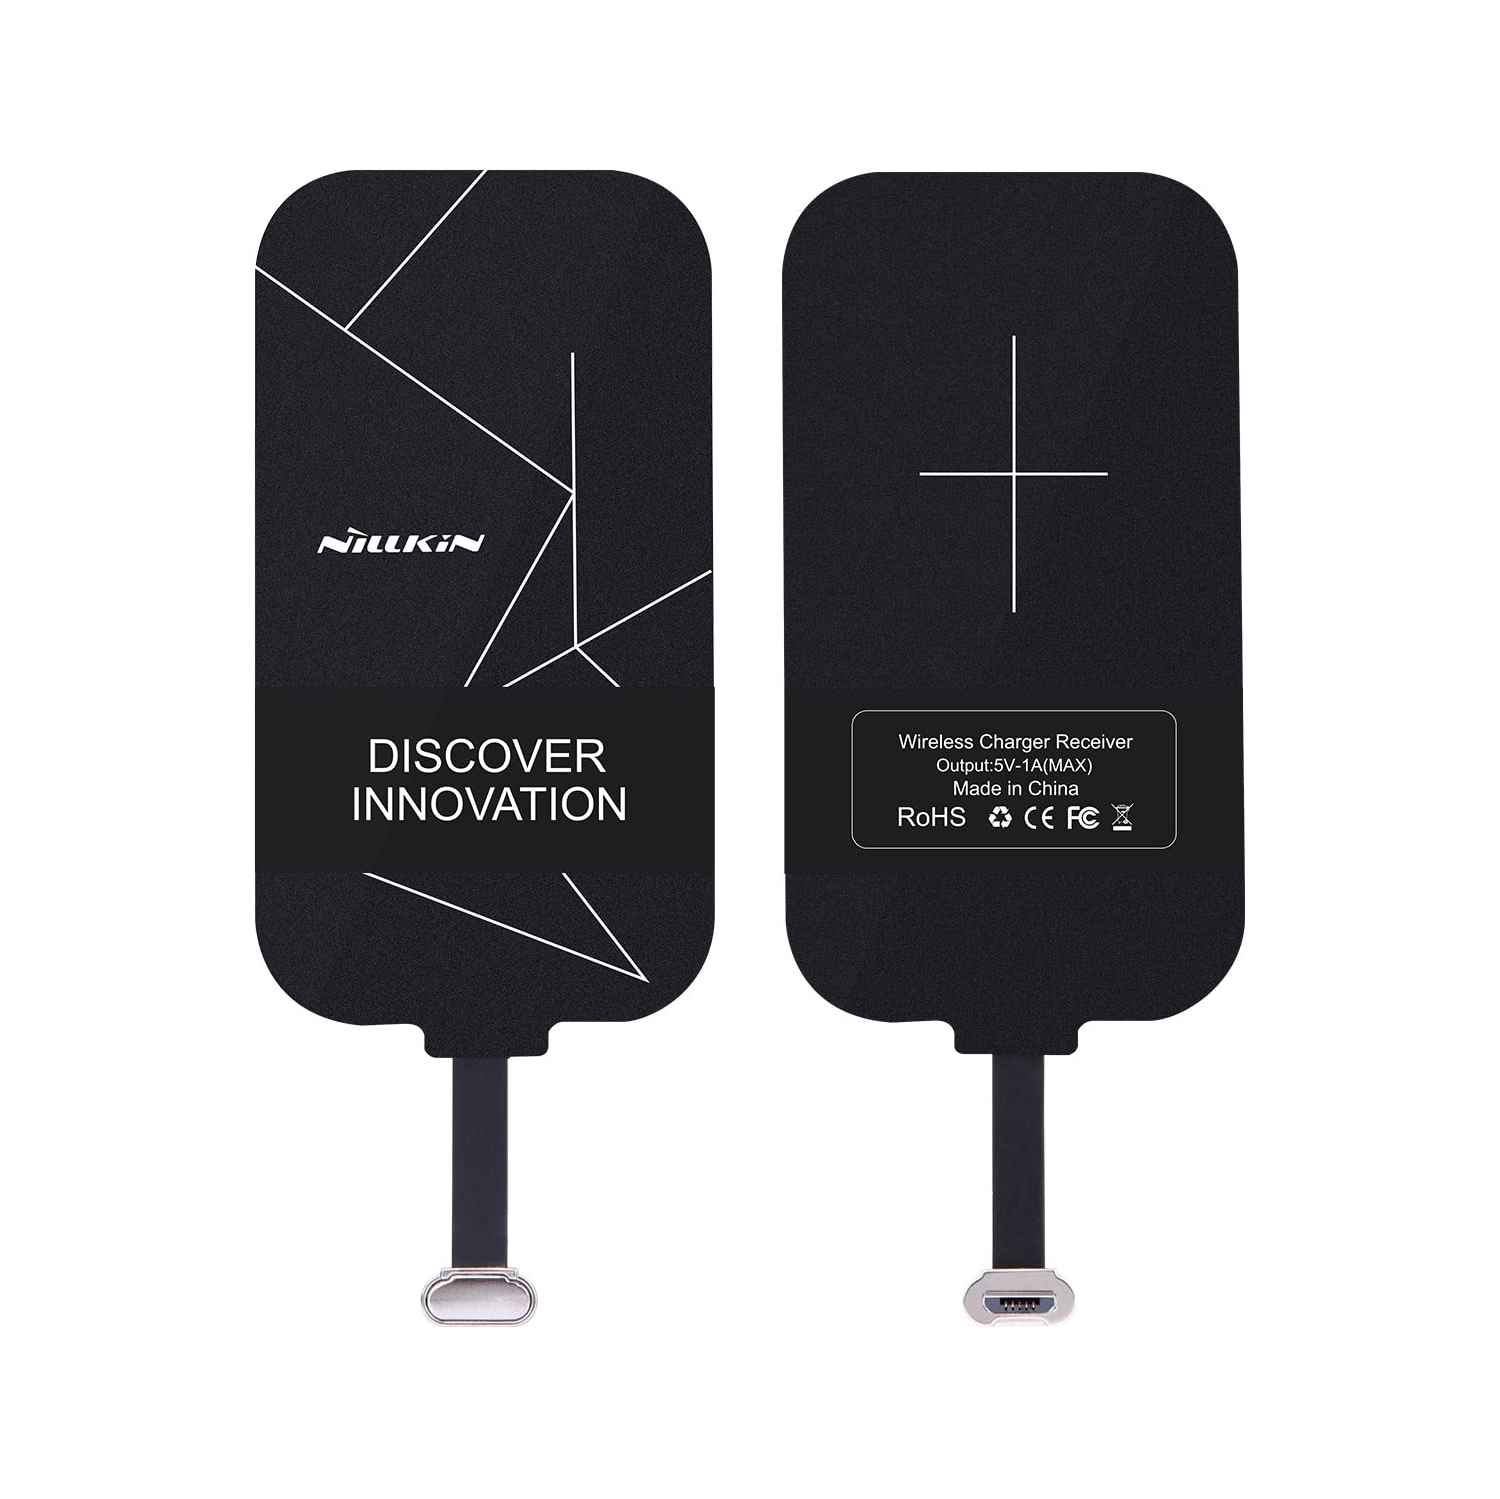 Wireless Charger Receiver, Magic Tag Qi Wireless Charger Charging Receiver Patch Module Chip for Samsung Galaxy